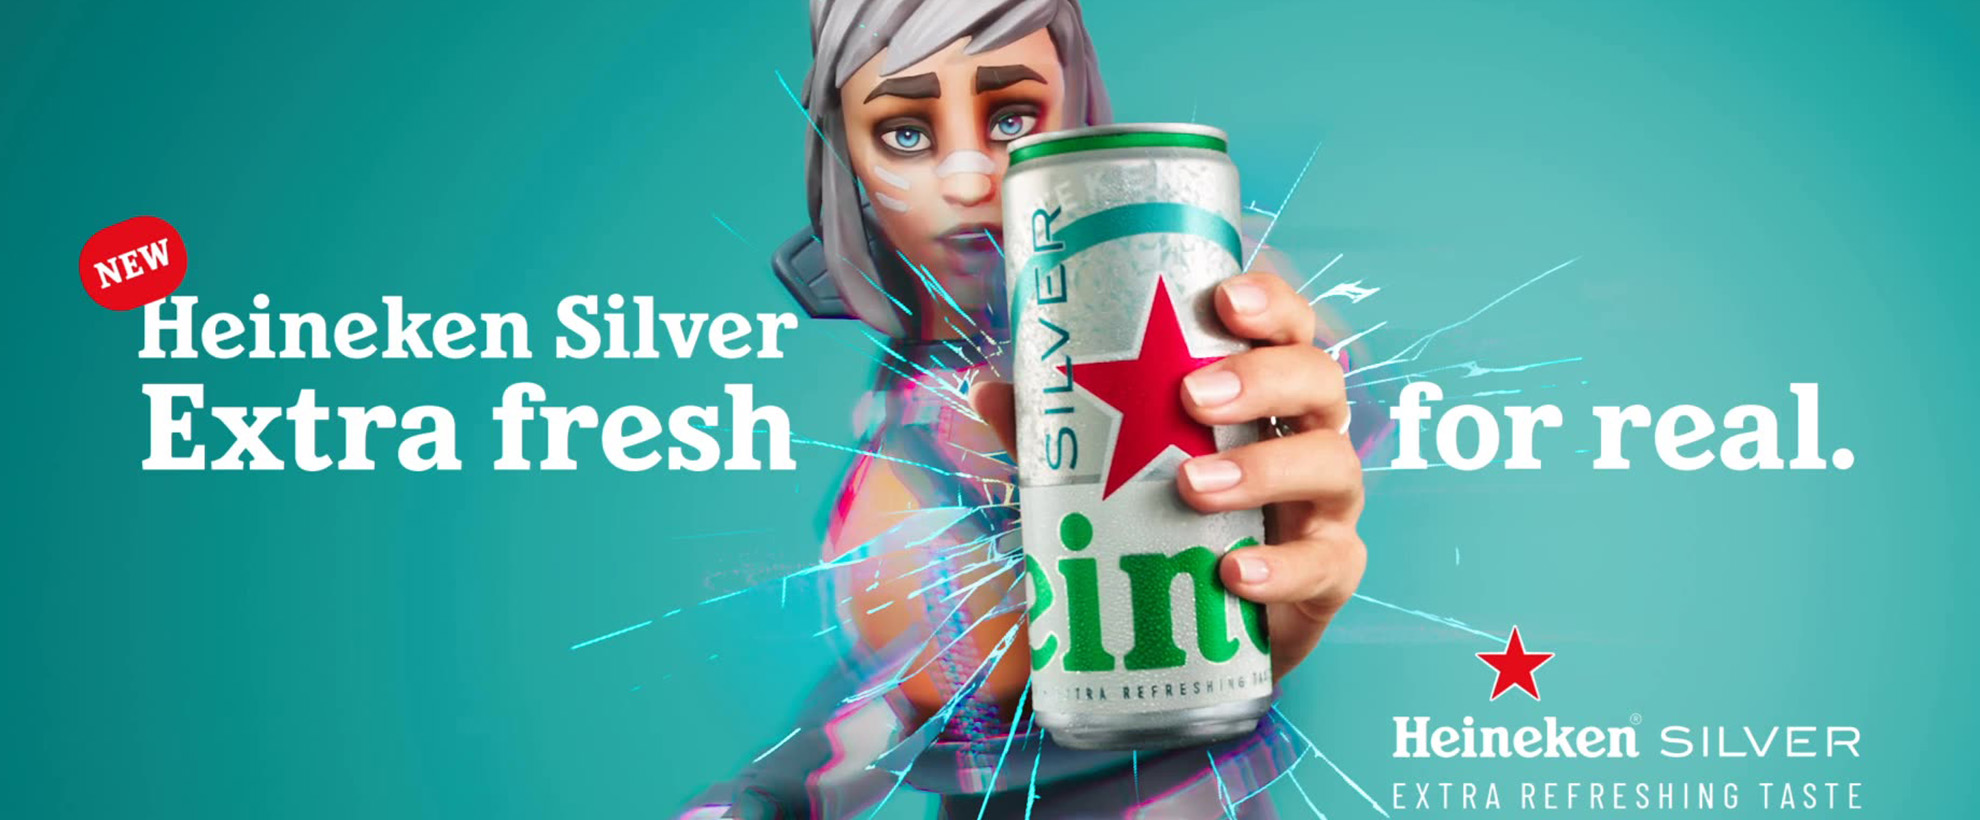 An animated woman with silver hair holds out a Heineken Silver can